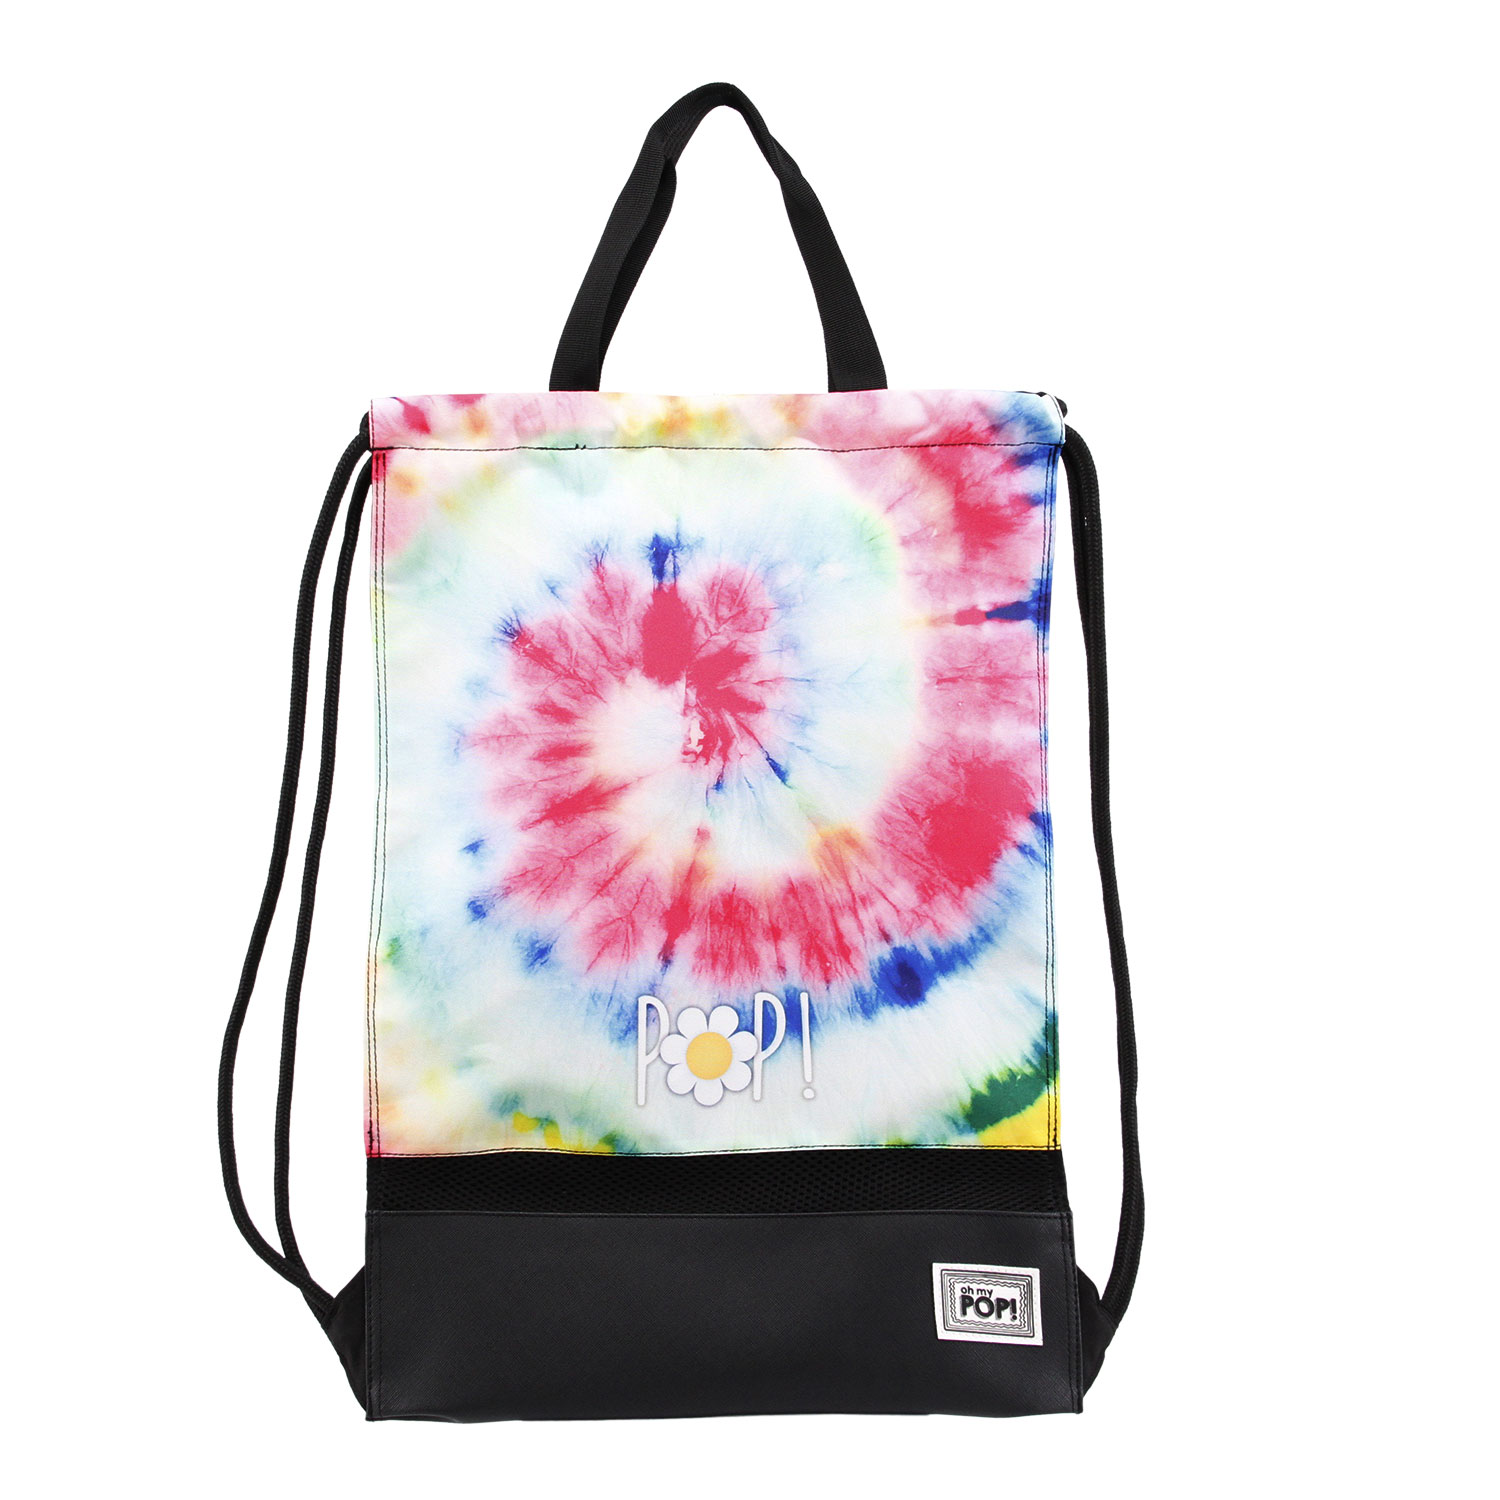 Storm Gymsack with Handles Oh My Pop! Tie Dye